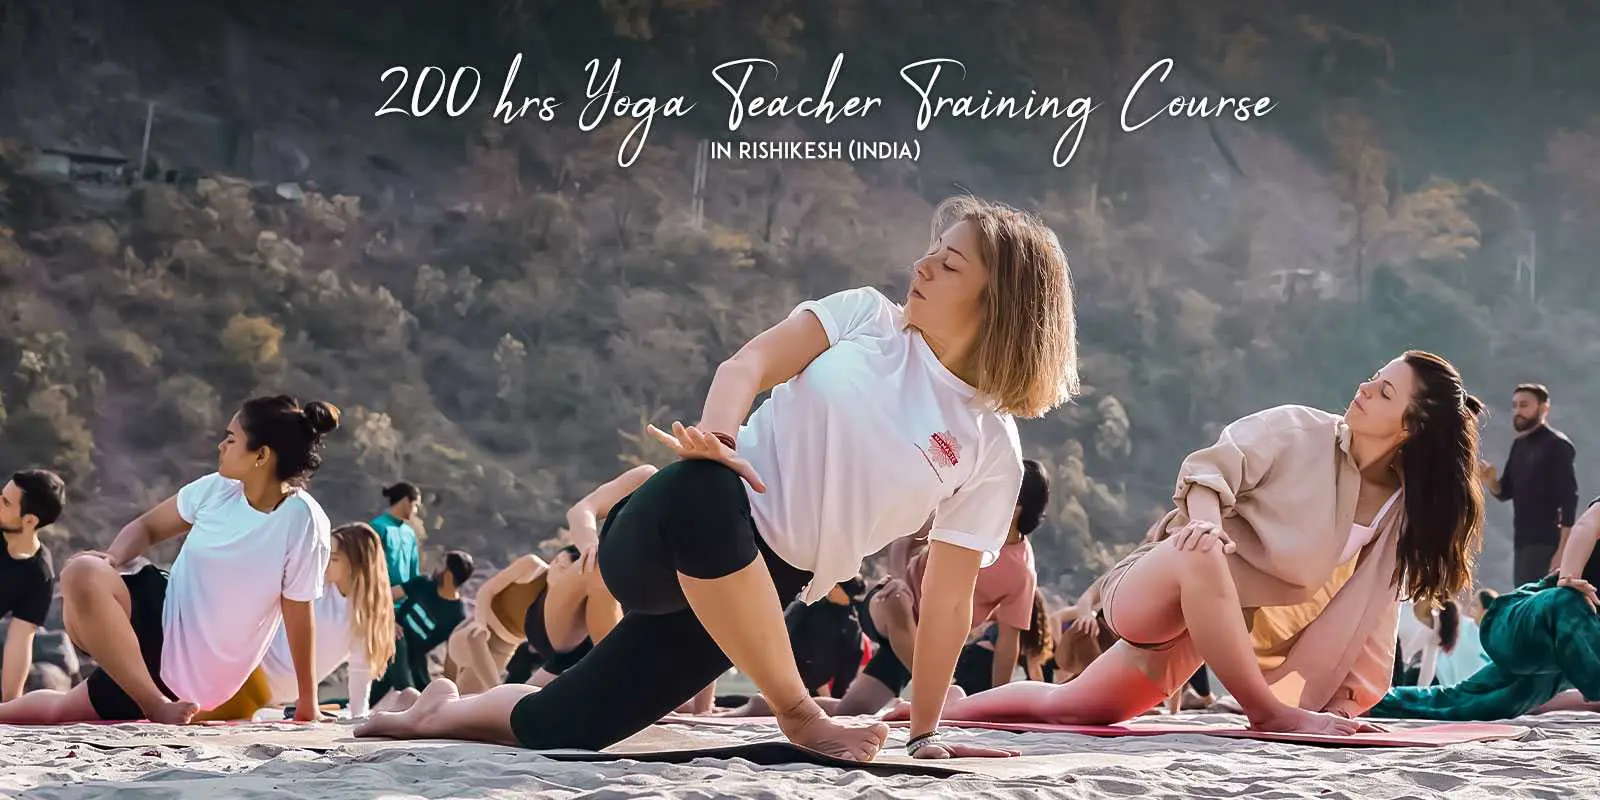 vinyasa yoga training india - Can I teach yoga without certification in India